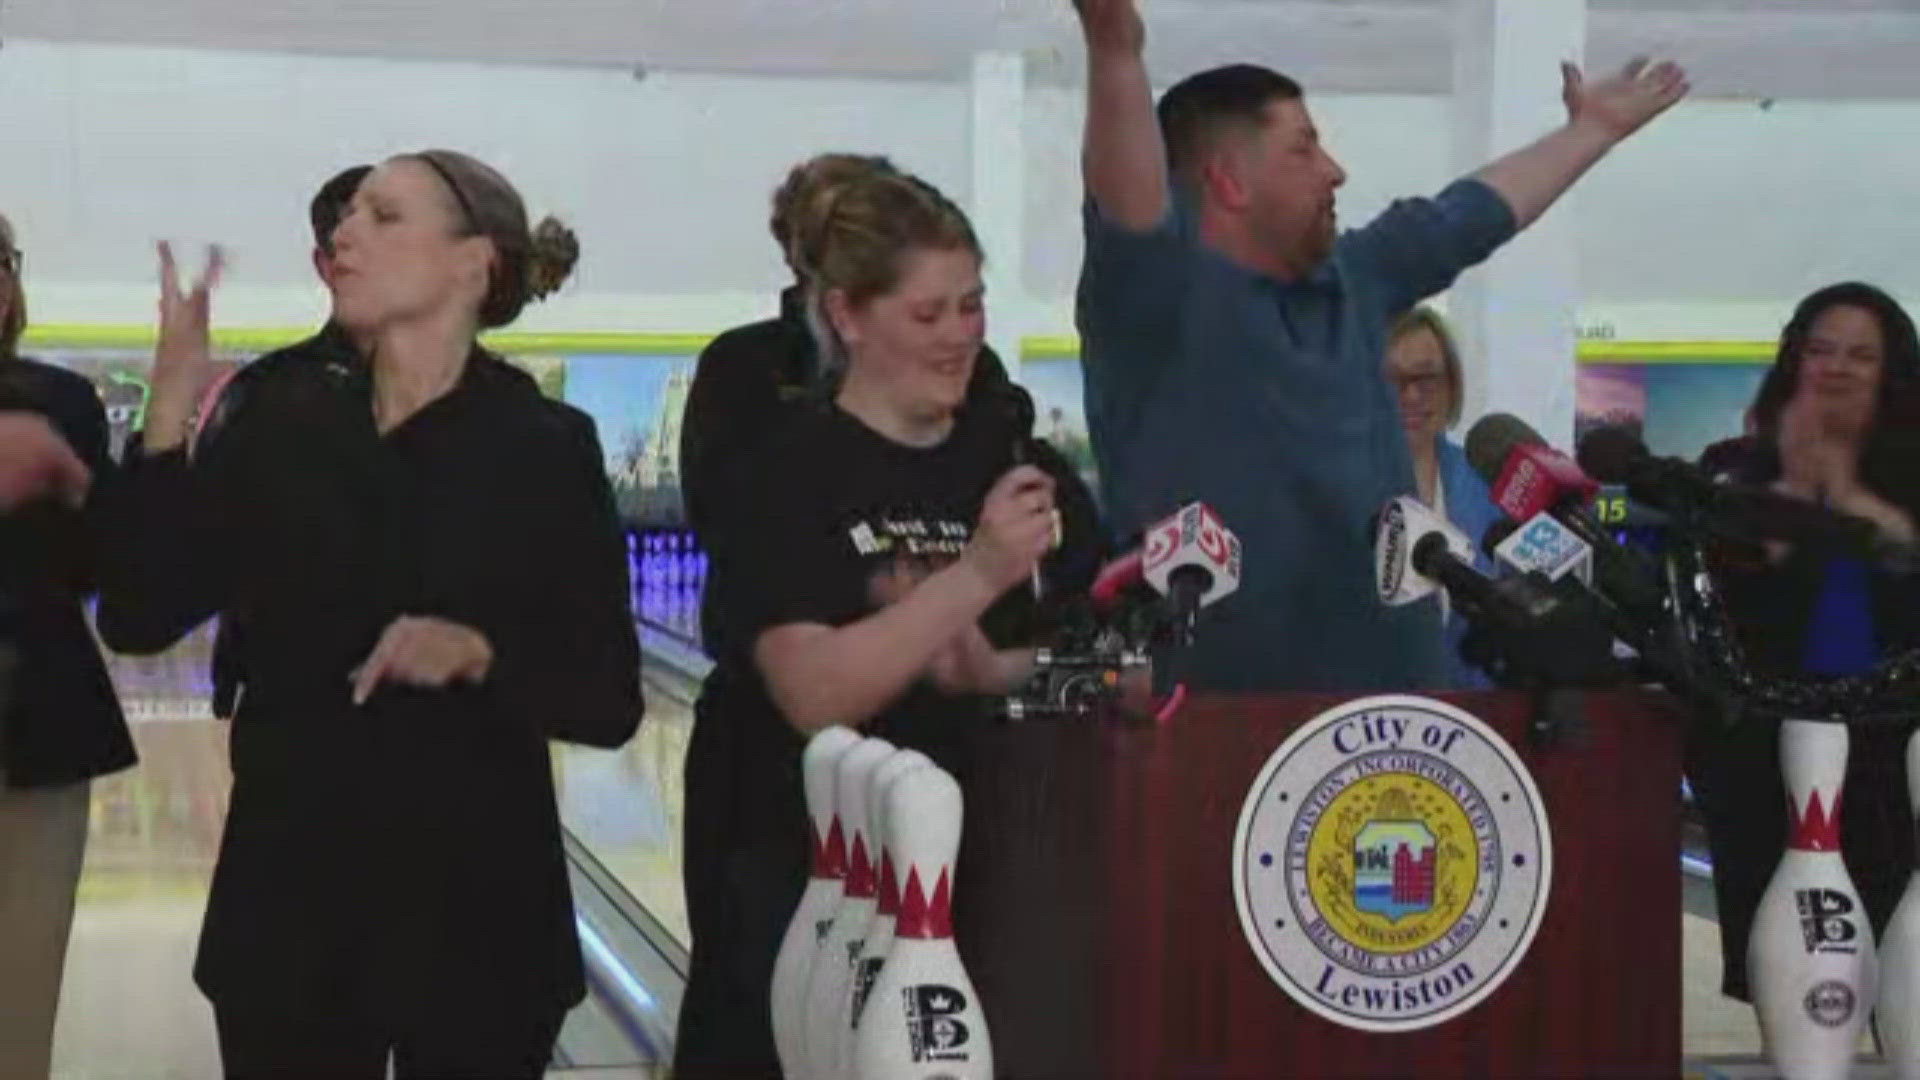 Just In Time Recreation welcomed bowlers and the general public today for the first time since October's mass shooting.